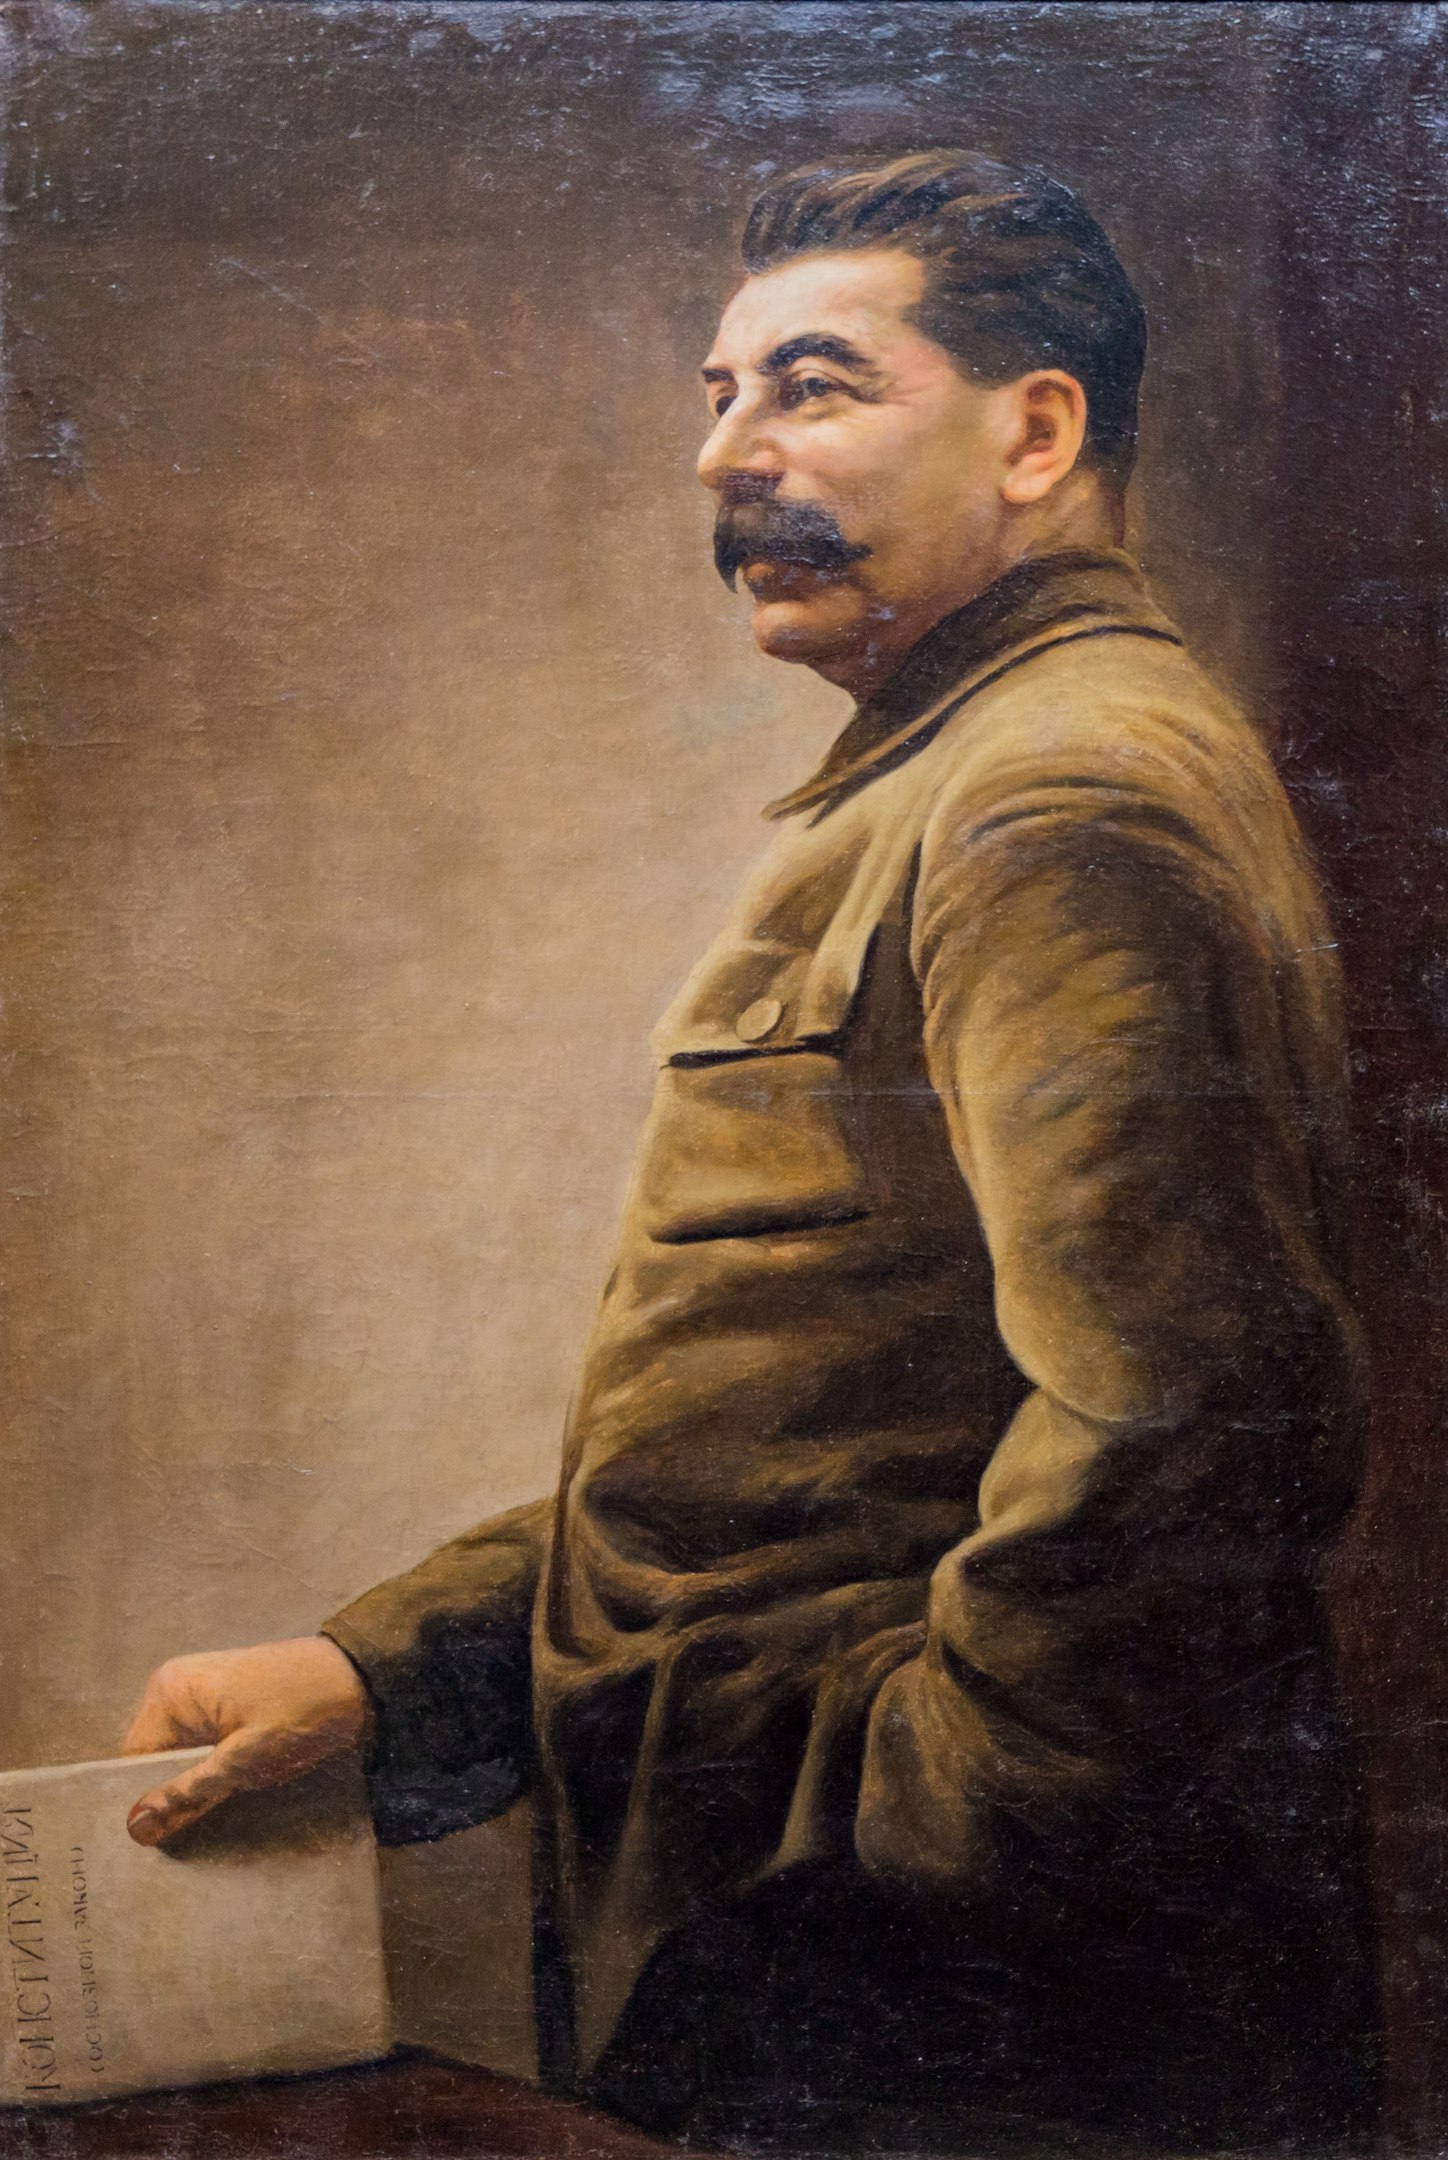 The anonymous portrait of Joseph Stalin. Image: VK / Moscow Victory Museum